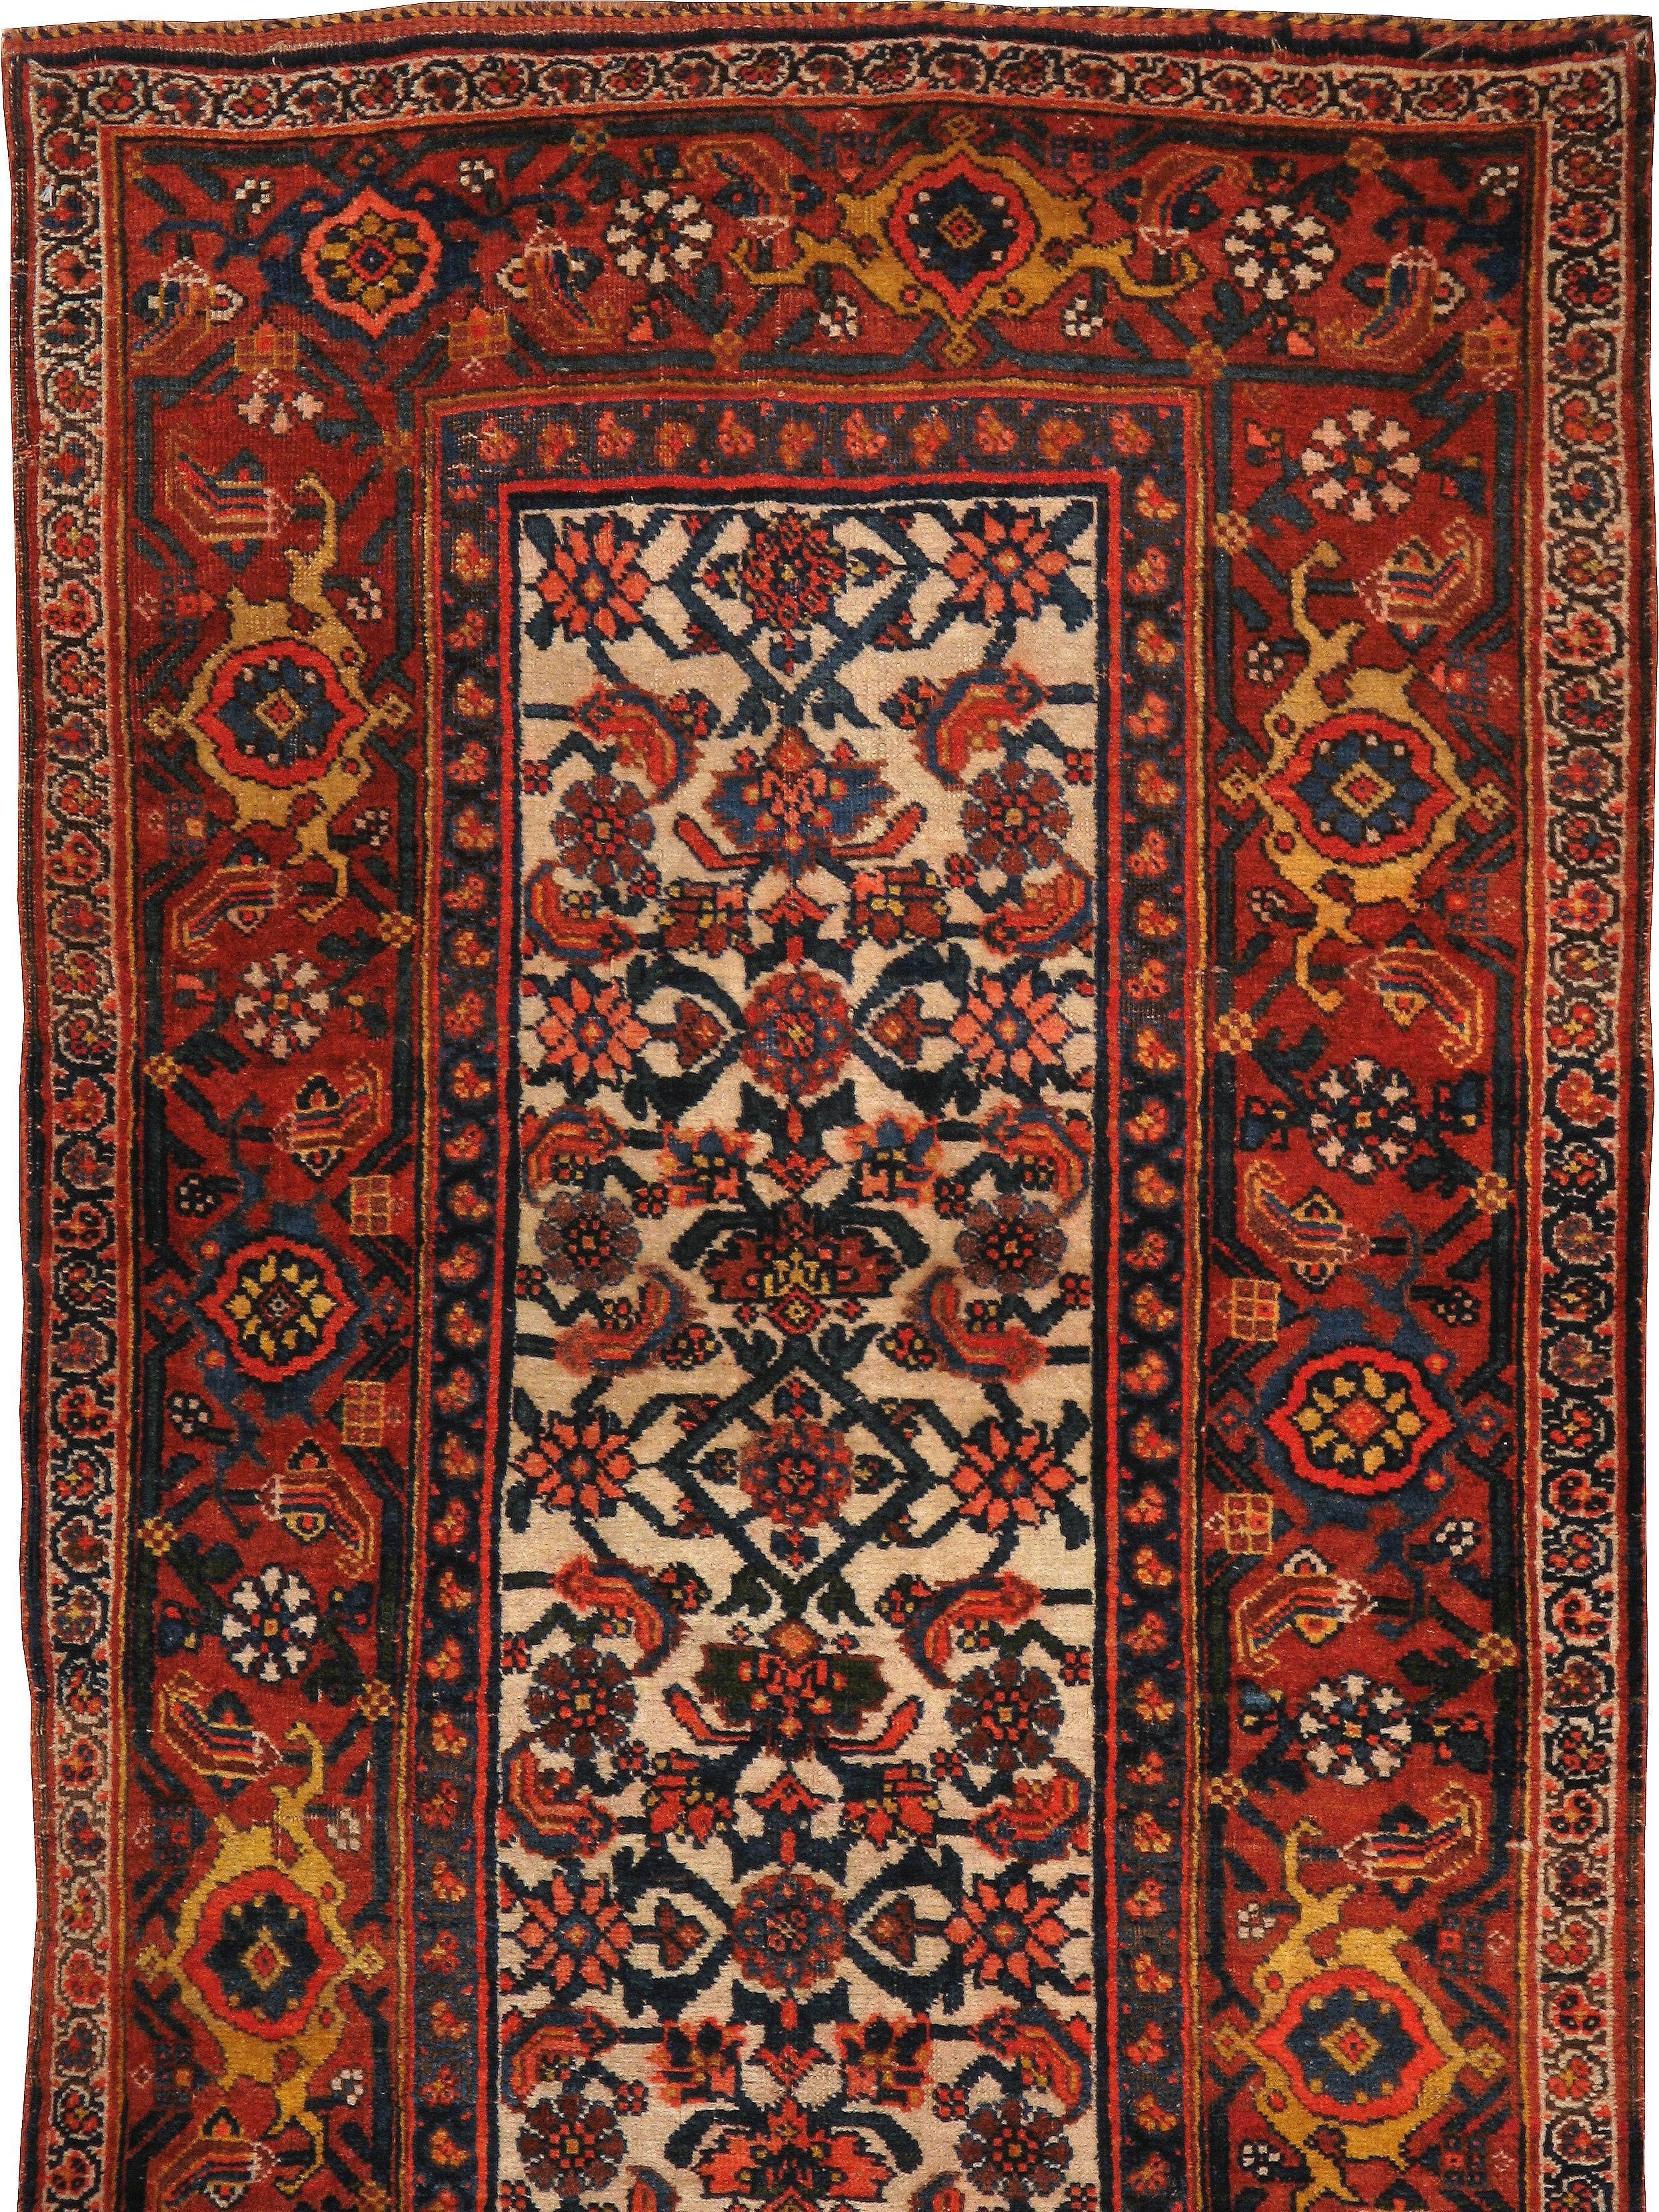 An antique Persian Bidjar rug from the turn of the 20th century.